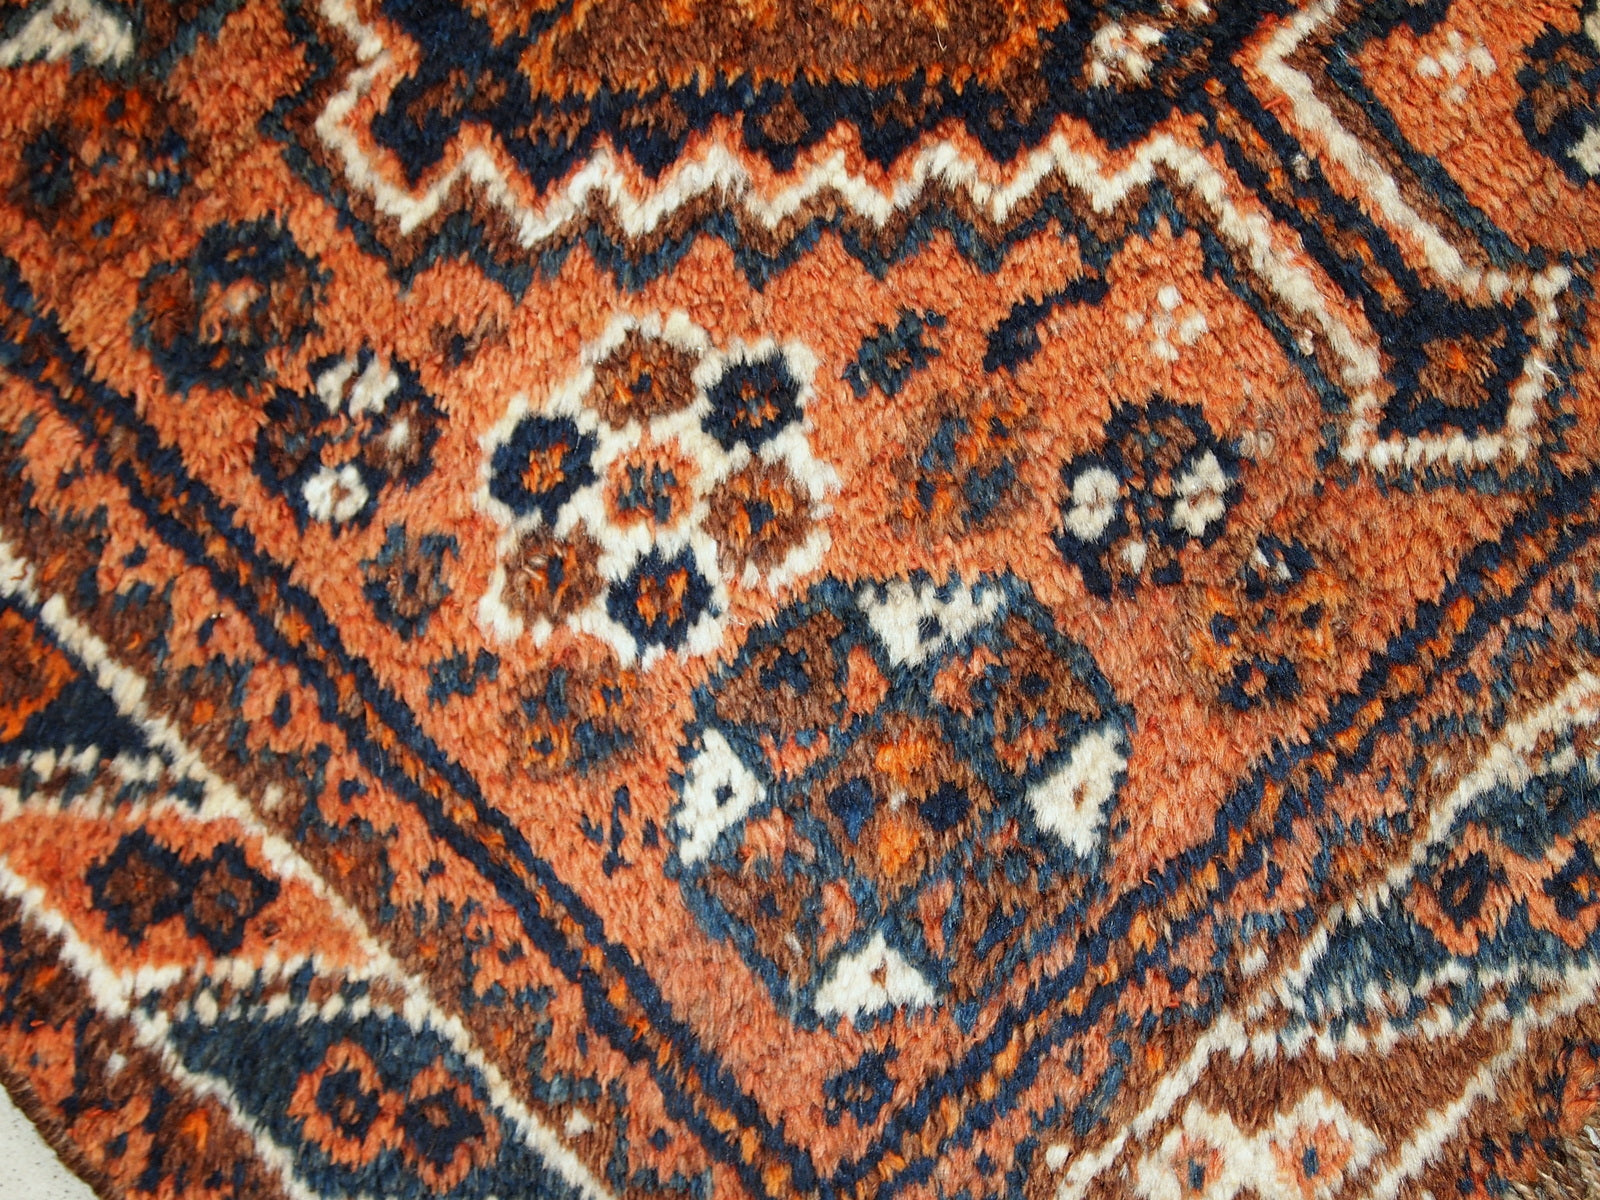 Antique collectible Persian Shiraz rug in original good condition. The rug is in rust shade with navy blue and white details. 